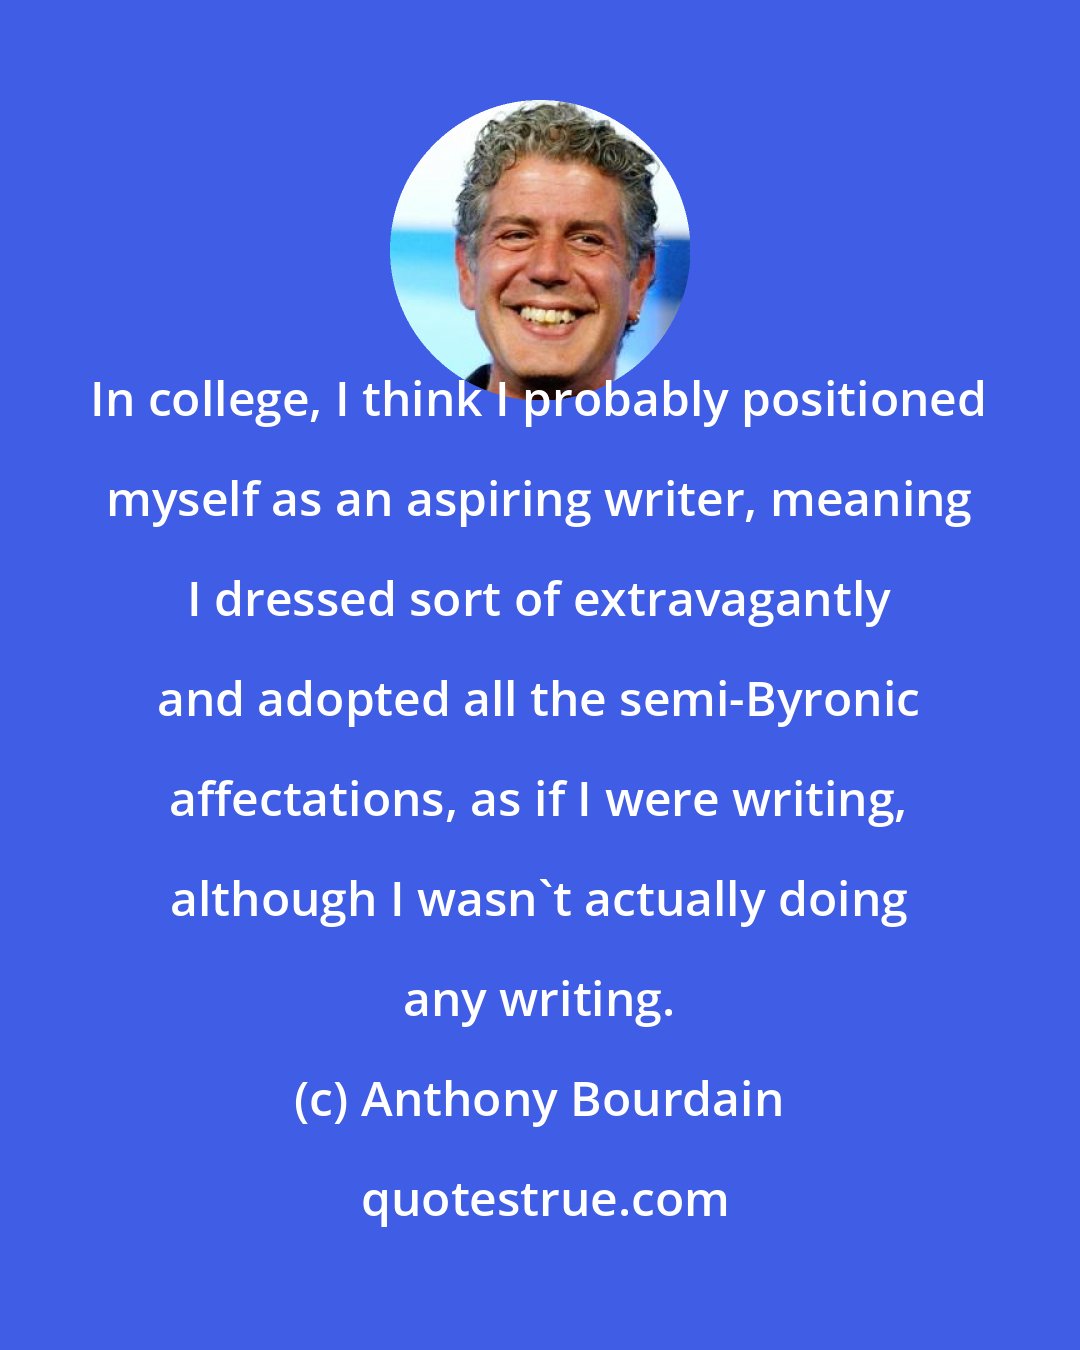 Anthony Bourdain: In college, I think I probably positioned myself as an aspiring writer, meaning I dressed sort of extravagantly and adopted all the semi-Byronic affectations, as if I were writing, although I wasn't actually doing any writing.